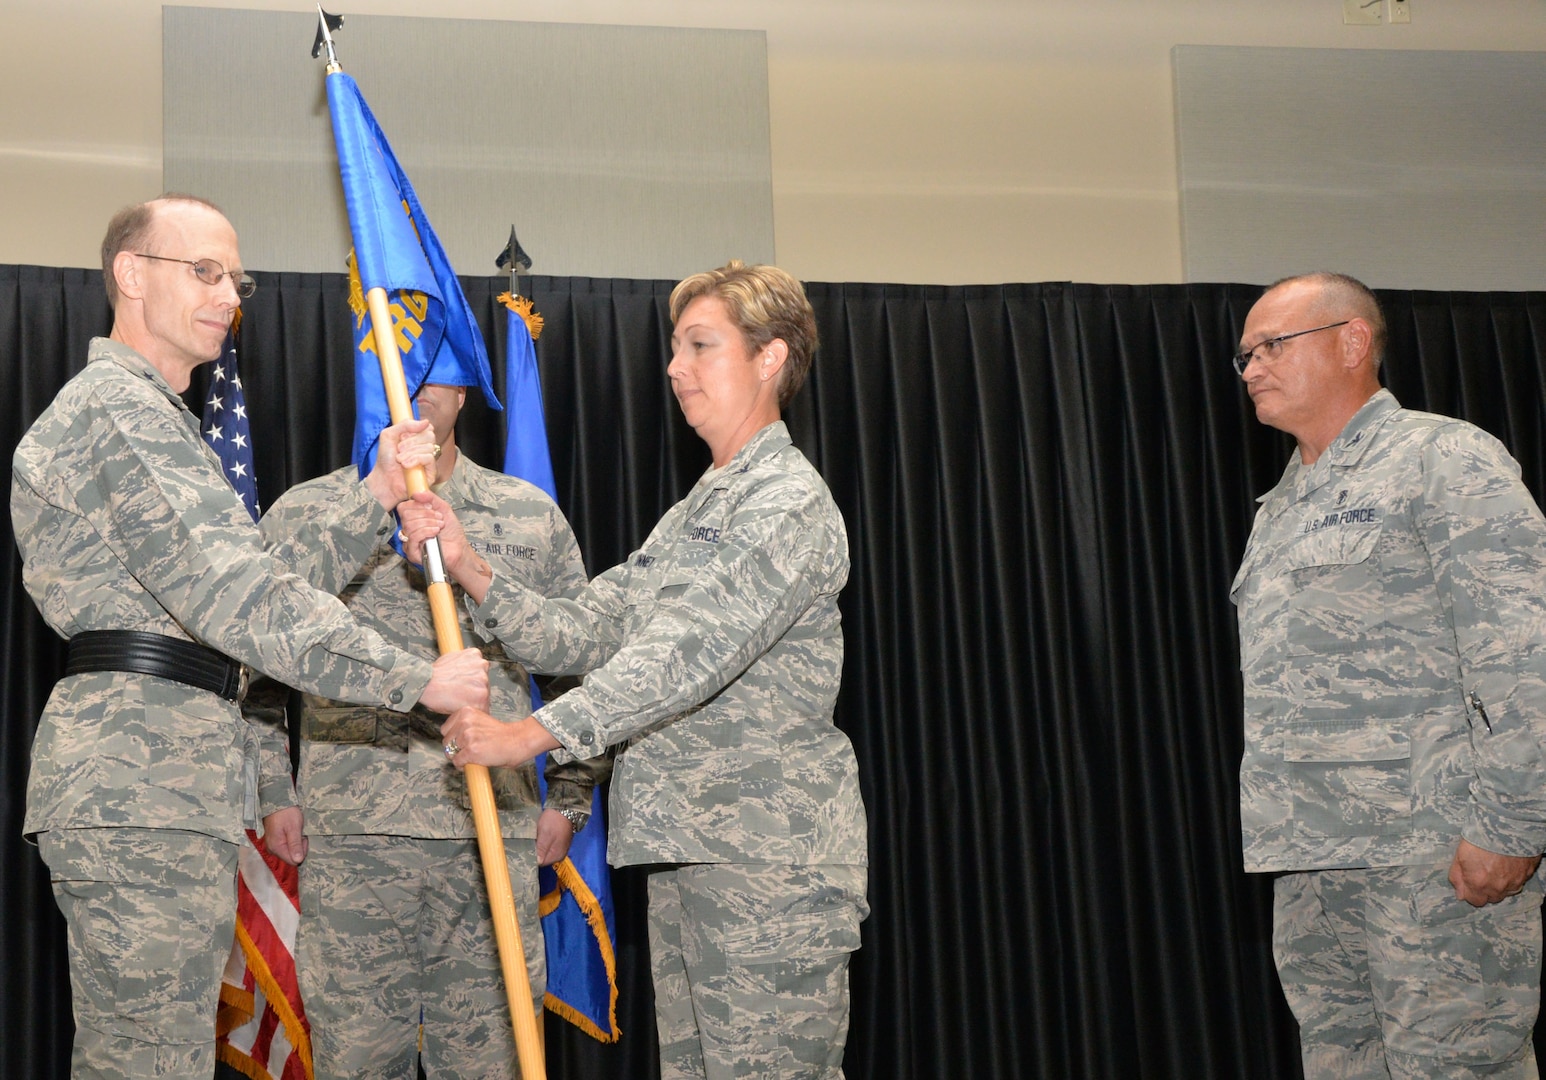 Air Force Maj. Gen. Bart O. Iddins (left), 59th Medical Wing commander at Joint Base San Antonio-Lackand, passes the 59th Training Group guidon to incoming commander Col. Karyn E. McKinney (center) as outgoing commander Col. (Dr.) Steven C. Caberto (right) looks on during the unit’s change of command ceremony at JBSA-Fort Sam Houston June 15. The 59th Training Group develops, delivers and evaluates medical training for 75 medical treatment facilities and deployment operations worldwide. The group supports military medical service and medical readiness training at the Medical Education and Training Campus at JBSA-Fort Sam Houston for 12,100 students annually, as well as two operating locations, one detachment and 17 sites around the world.